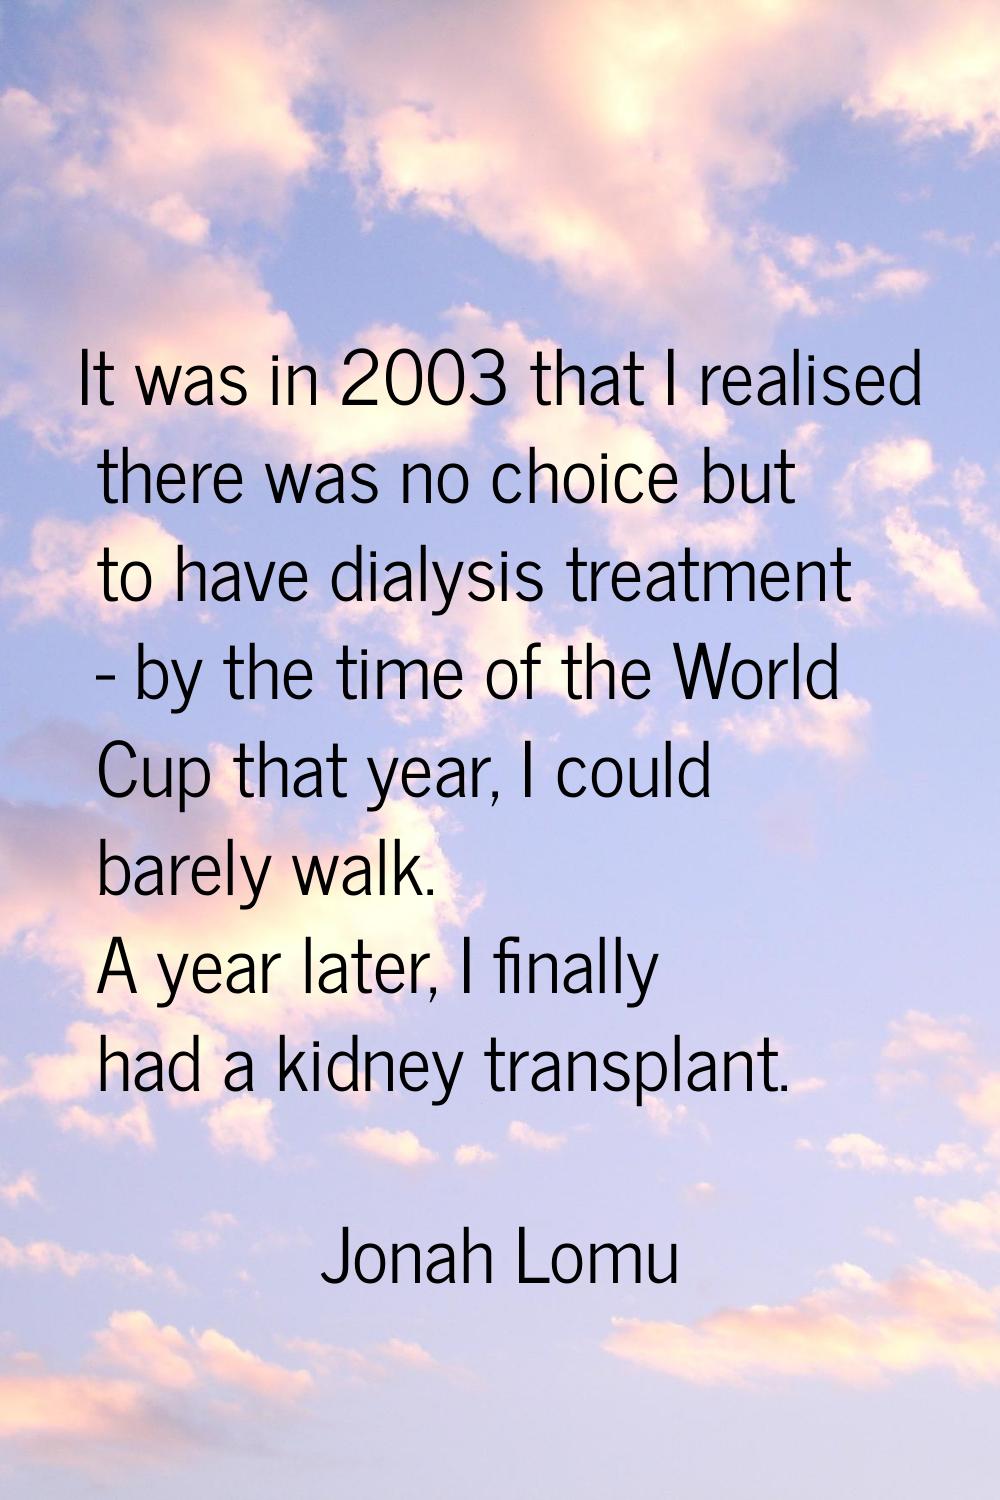 It was in 2003 that I realised there was no choice but to have dialysis treatment - by the time of 